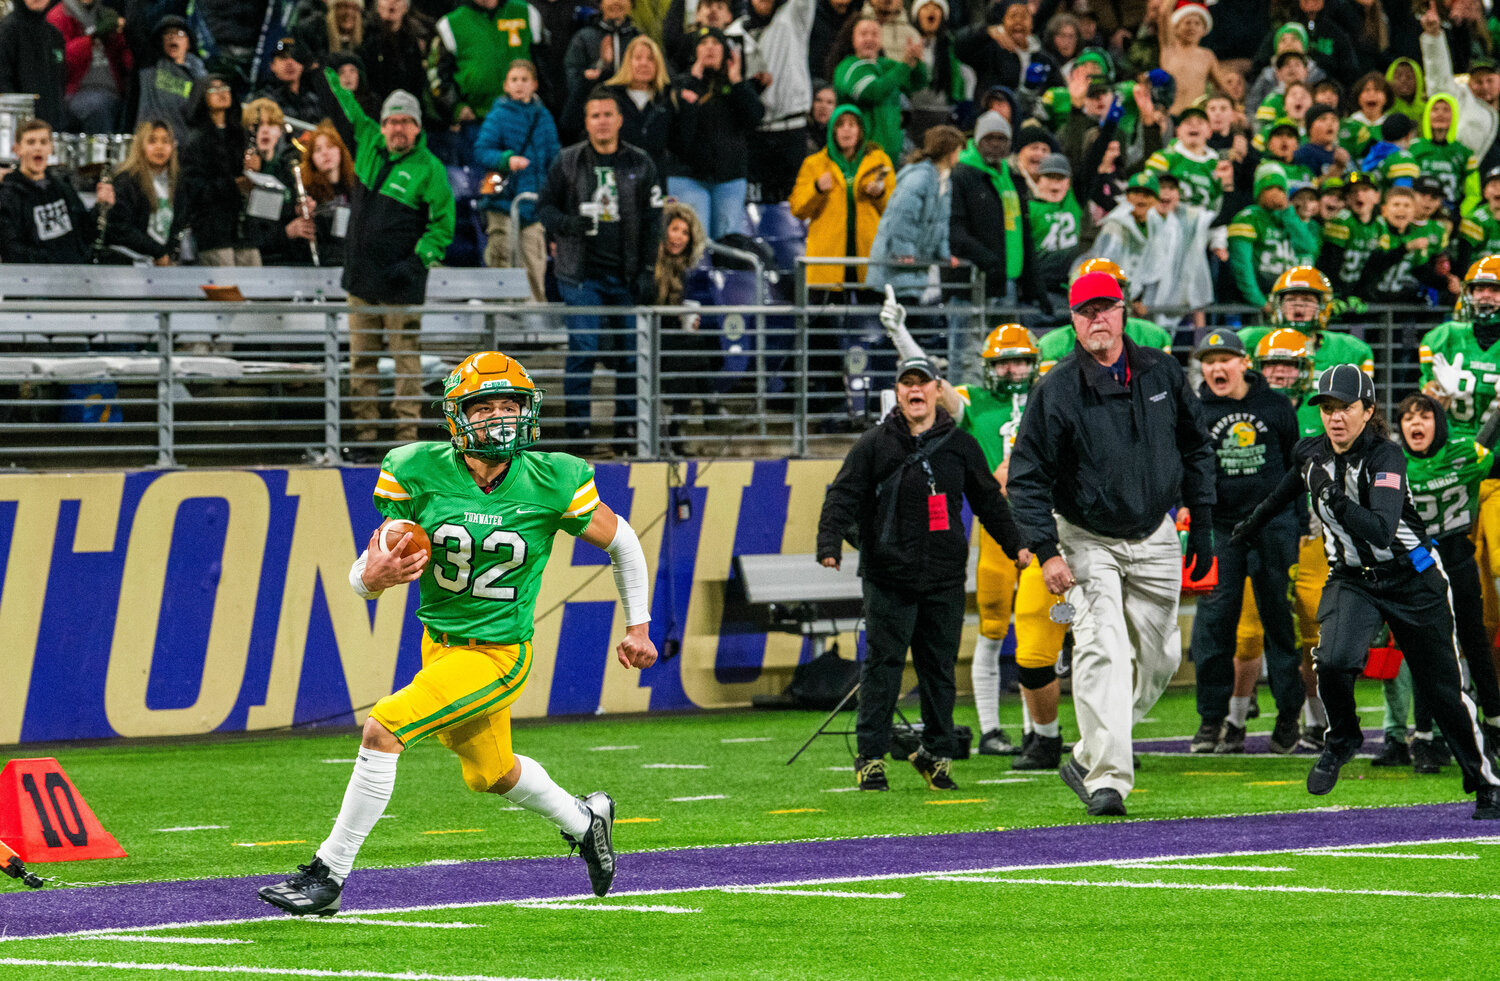 Tumwater’s Peyton Davis (32) completes a long fourth-down conversion running through Anacortes defenders during the 2A State Championship on Saturday.